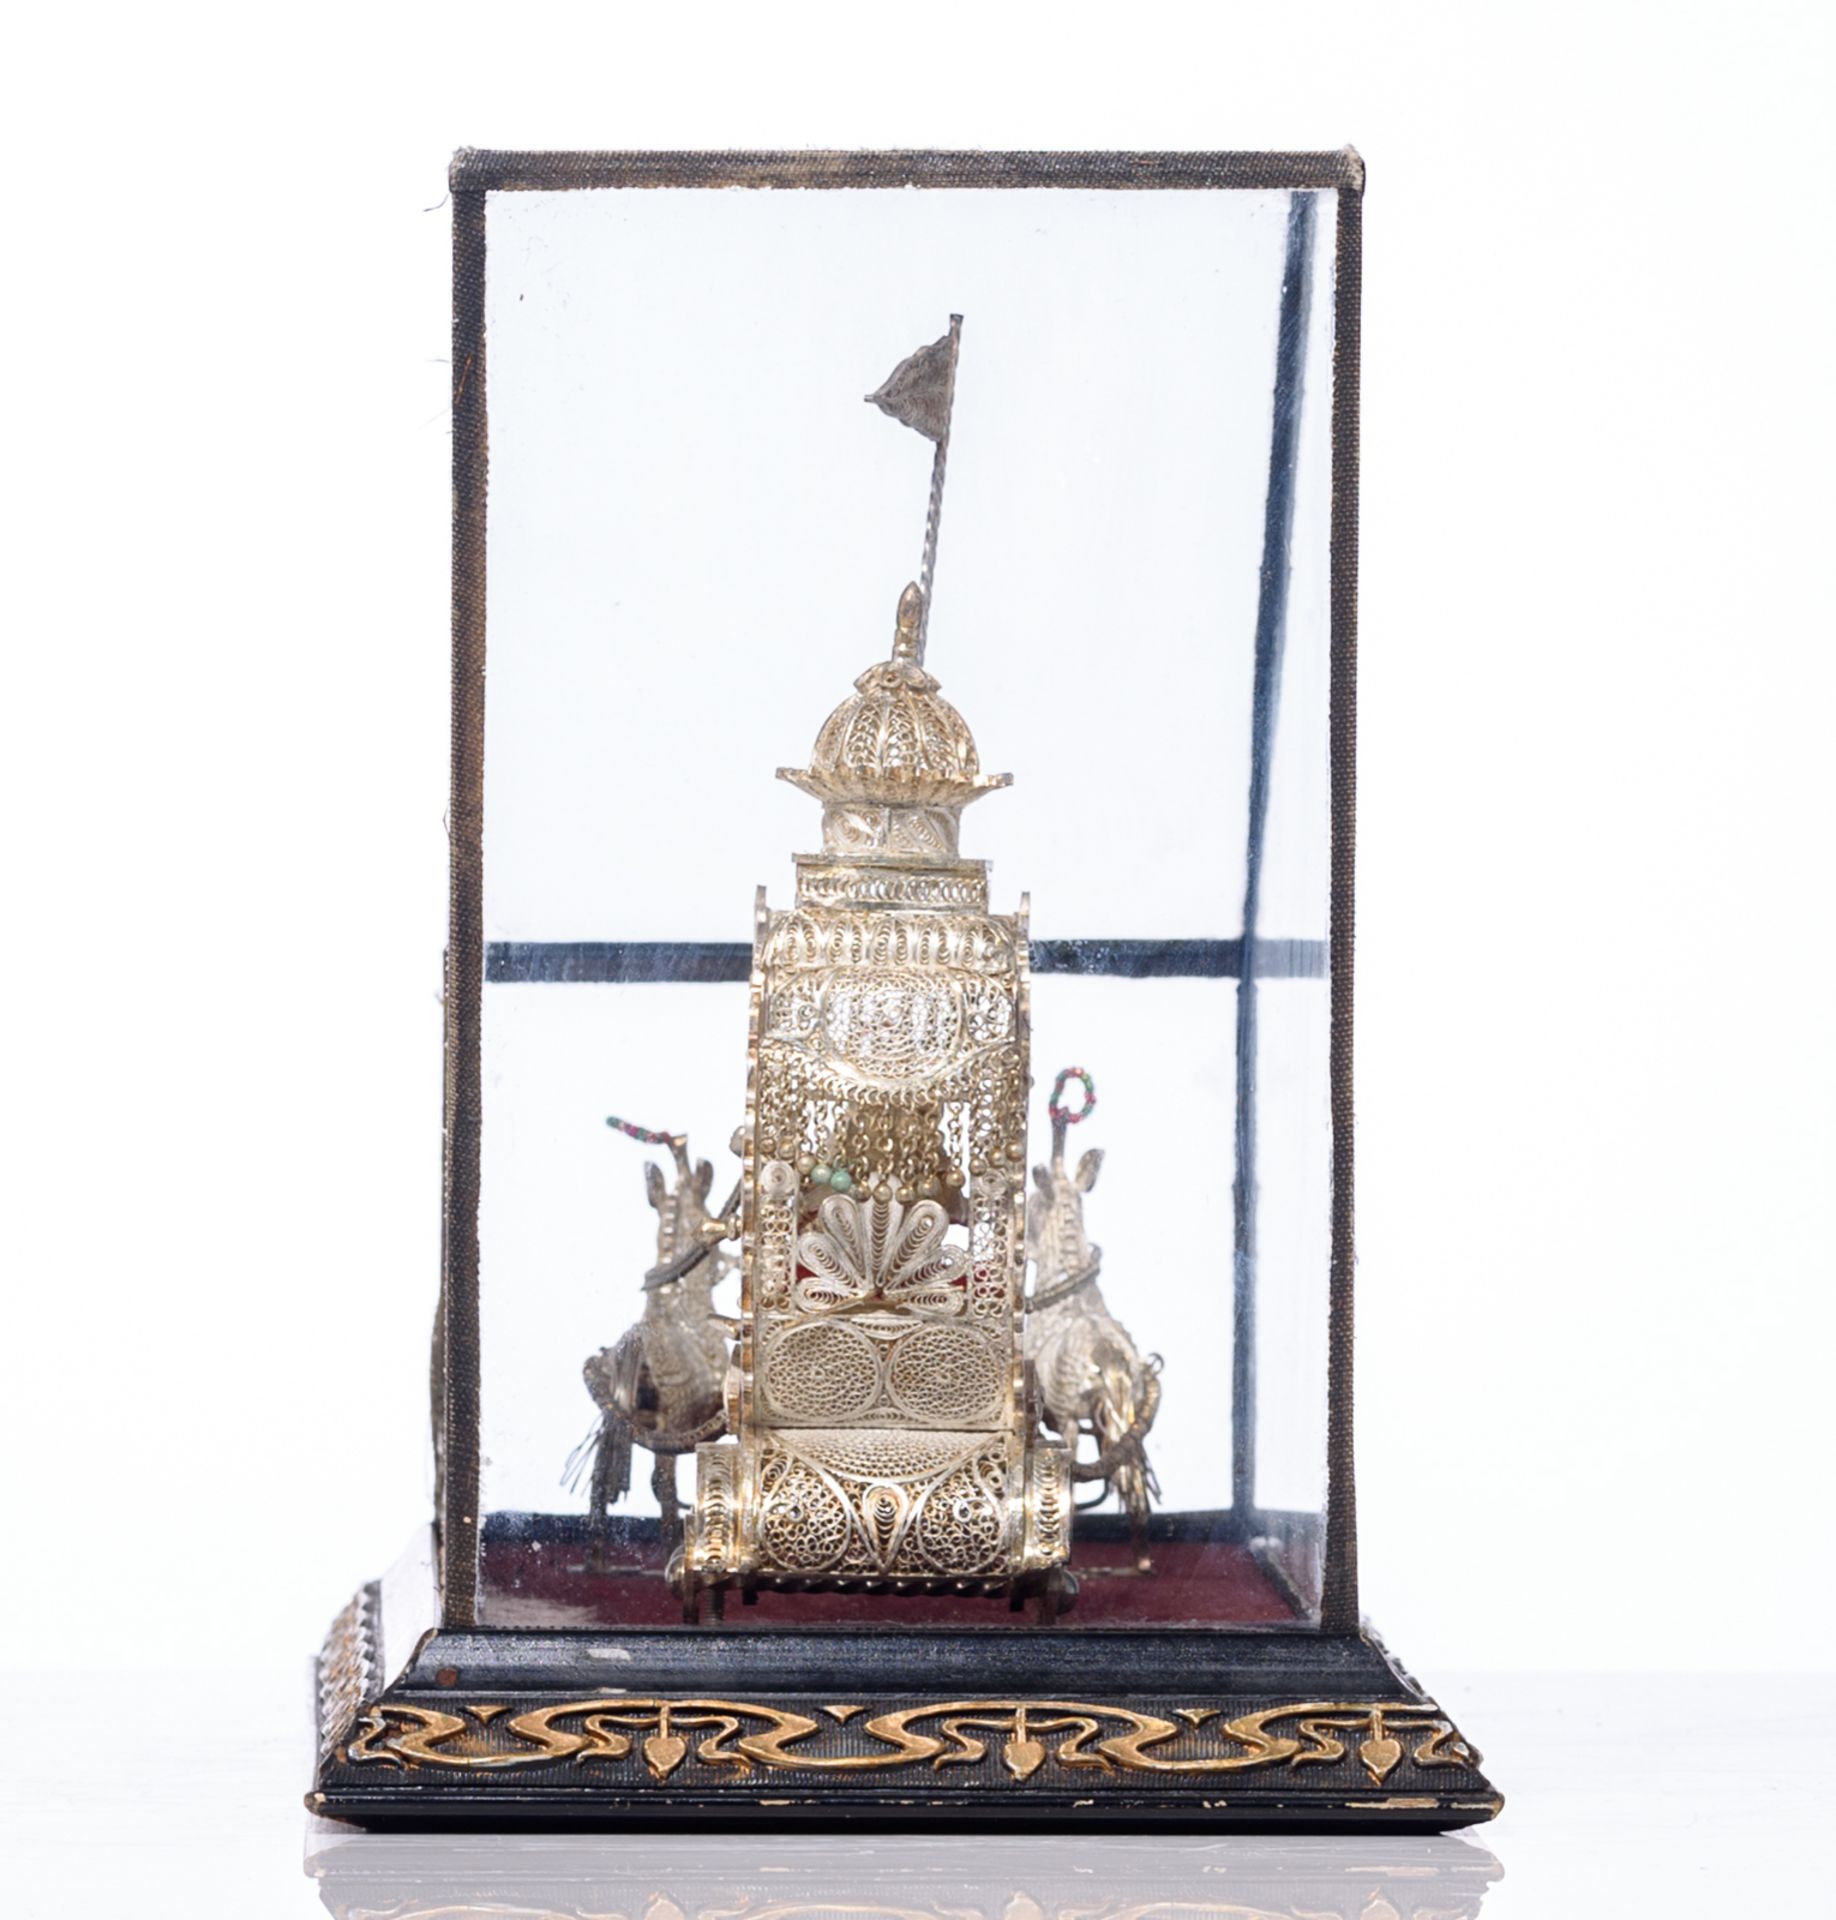 An Oriental silver filigree horse-drawn carriage, in a glass case with an Art Nouveau decorated base - Bild 3 aus 7